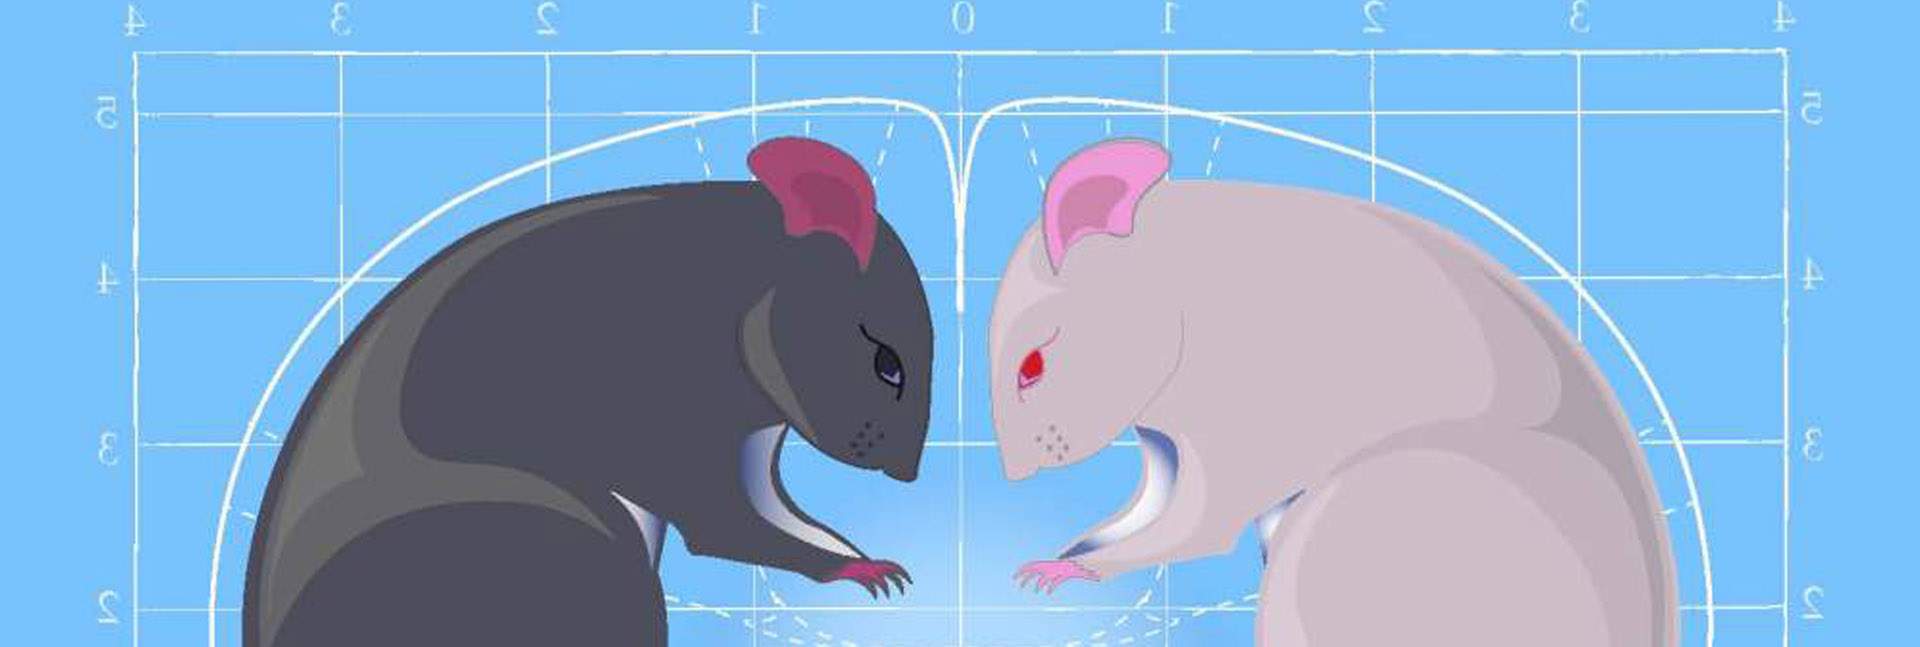 Abstract image of two mice 